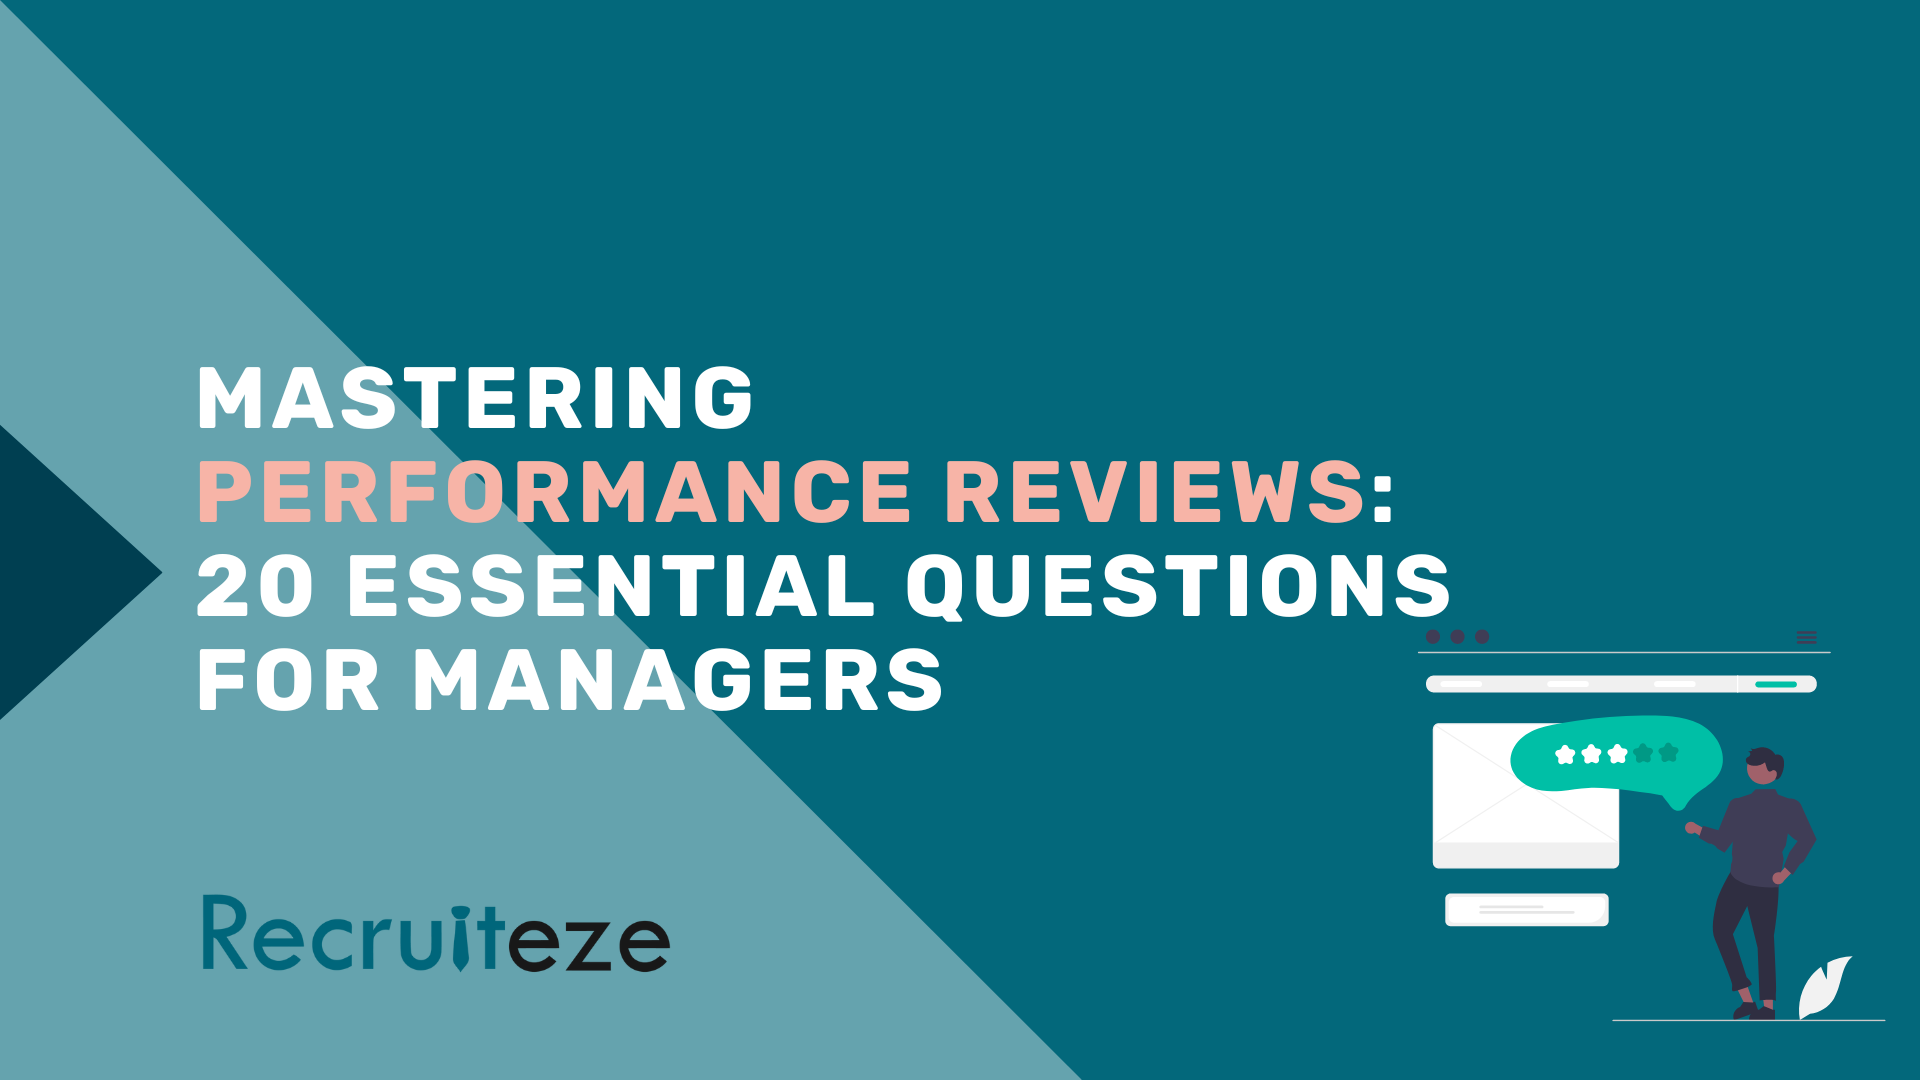 Mastering Performance Reviews: 20 Essential Questions for Managers